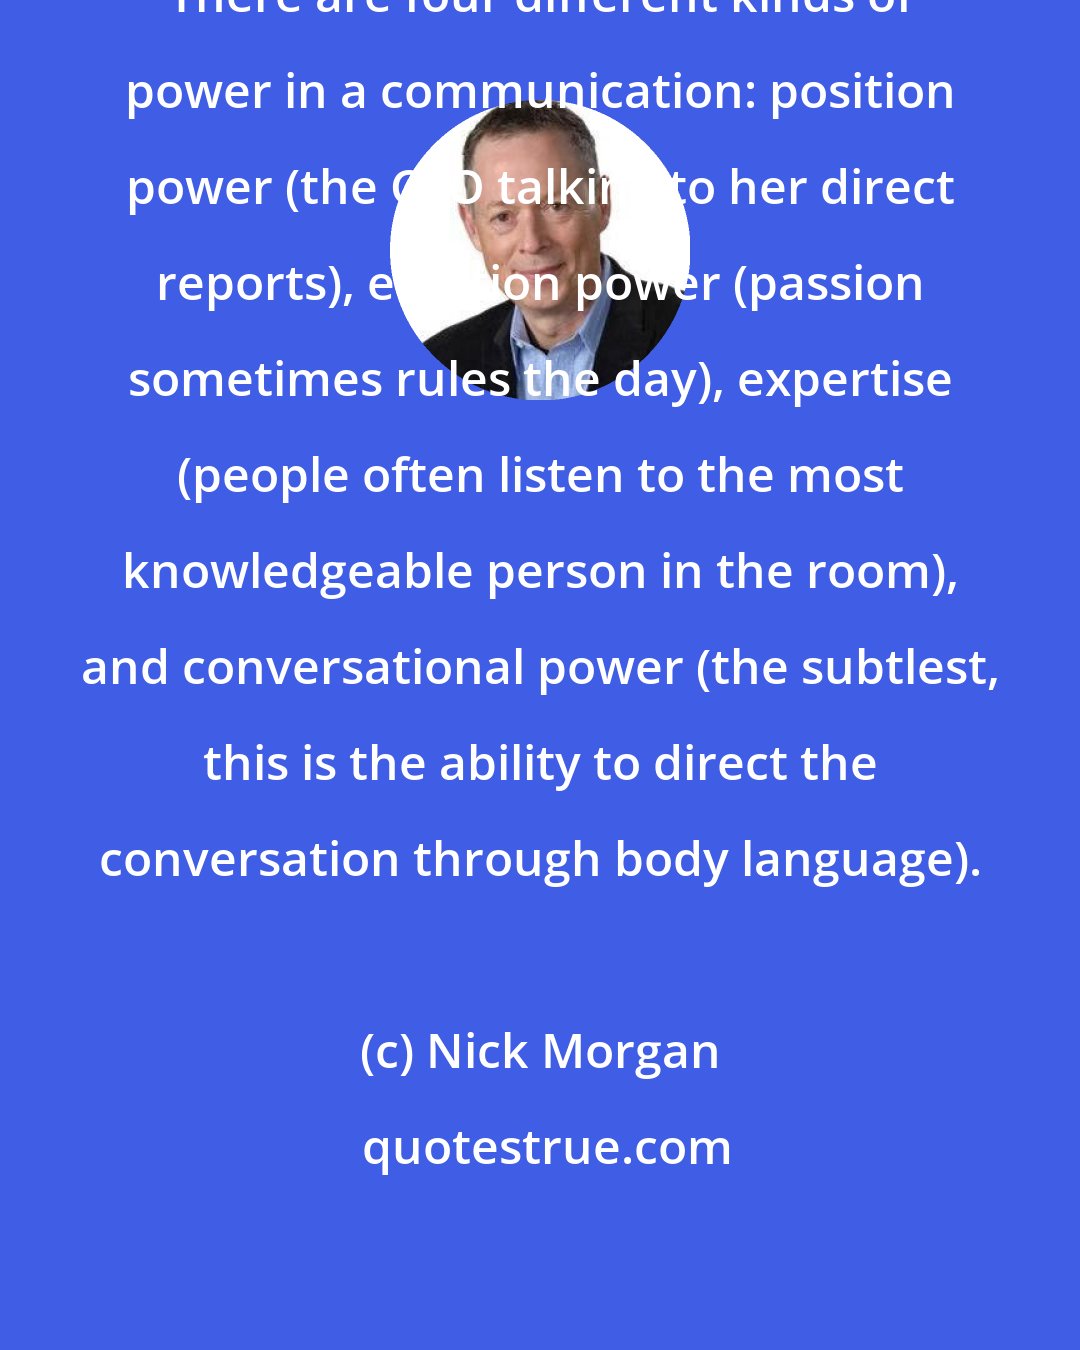 Nick Morgan: There are four different kinds of power in a communication: position power (the CEO talking to her direct reports), emotion power (passion sometimes rules the day), expertise (people often listen to the most knowledgeable person in the room), and conversational power (the subtlest, this is the ability to direct the conversation through body language).